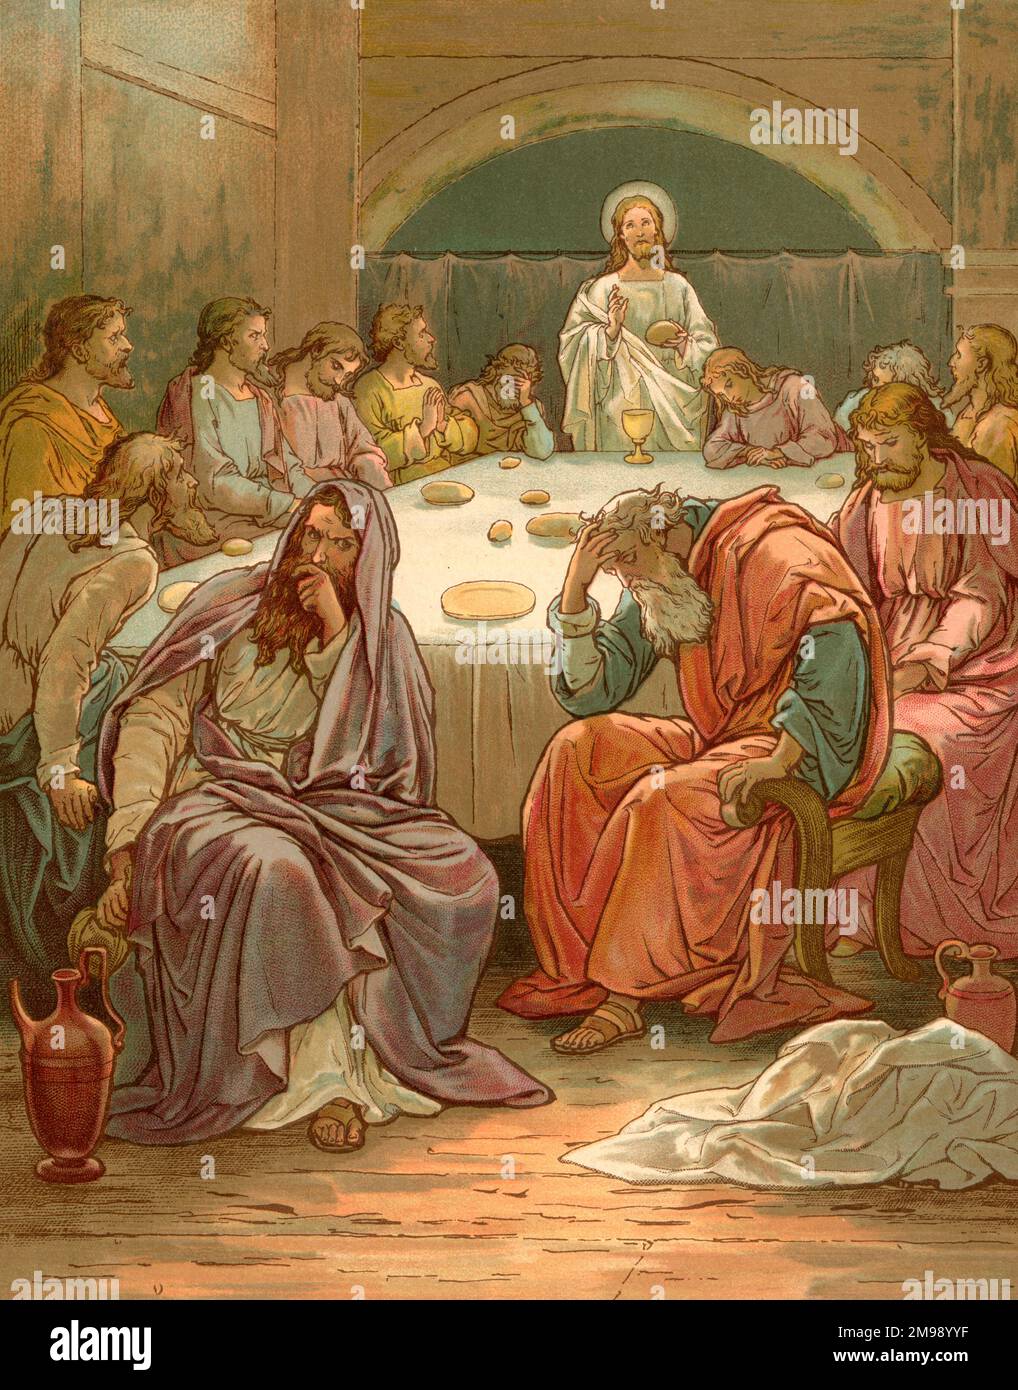 Biblical Tales by John Lawson, Jesus at the Last Supper. Stock Photo